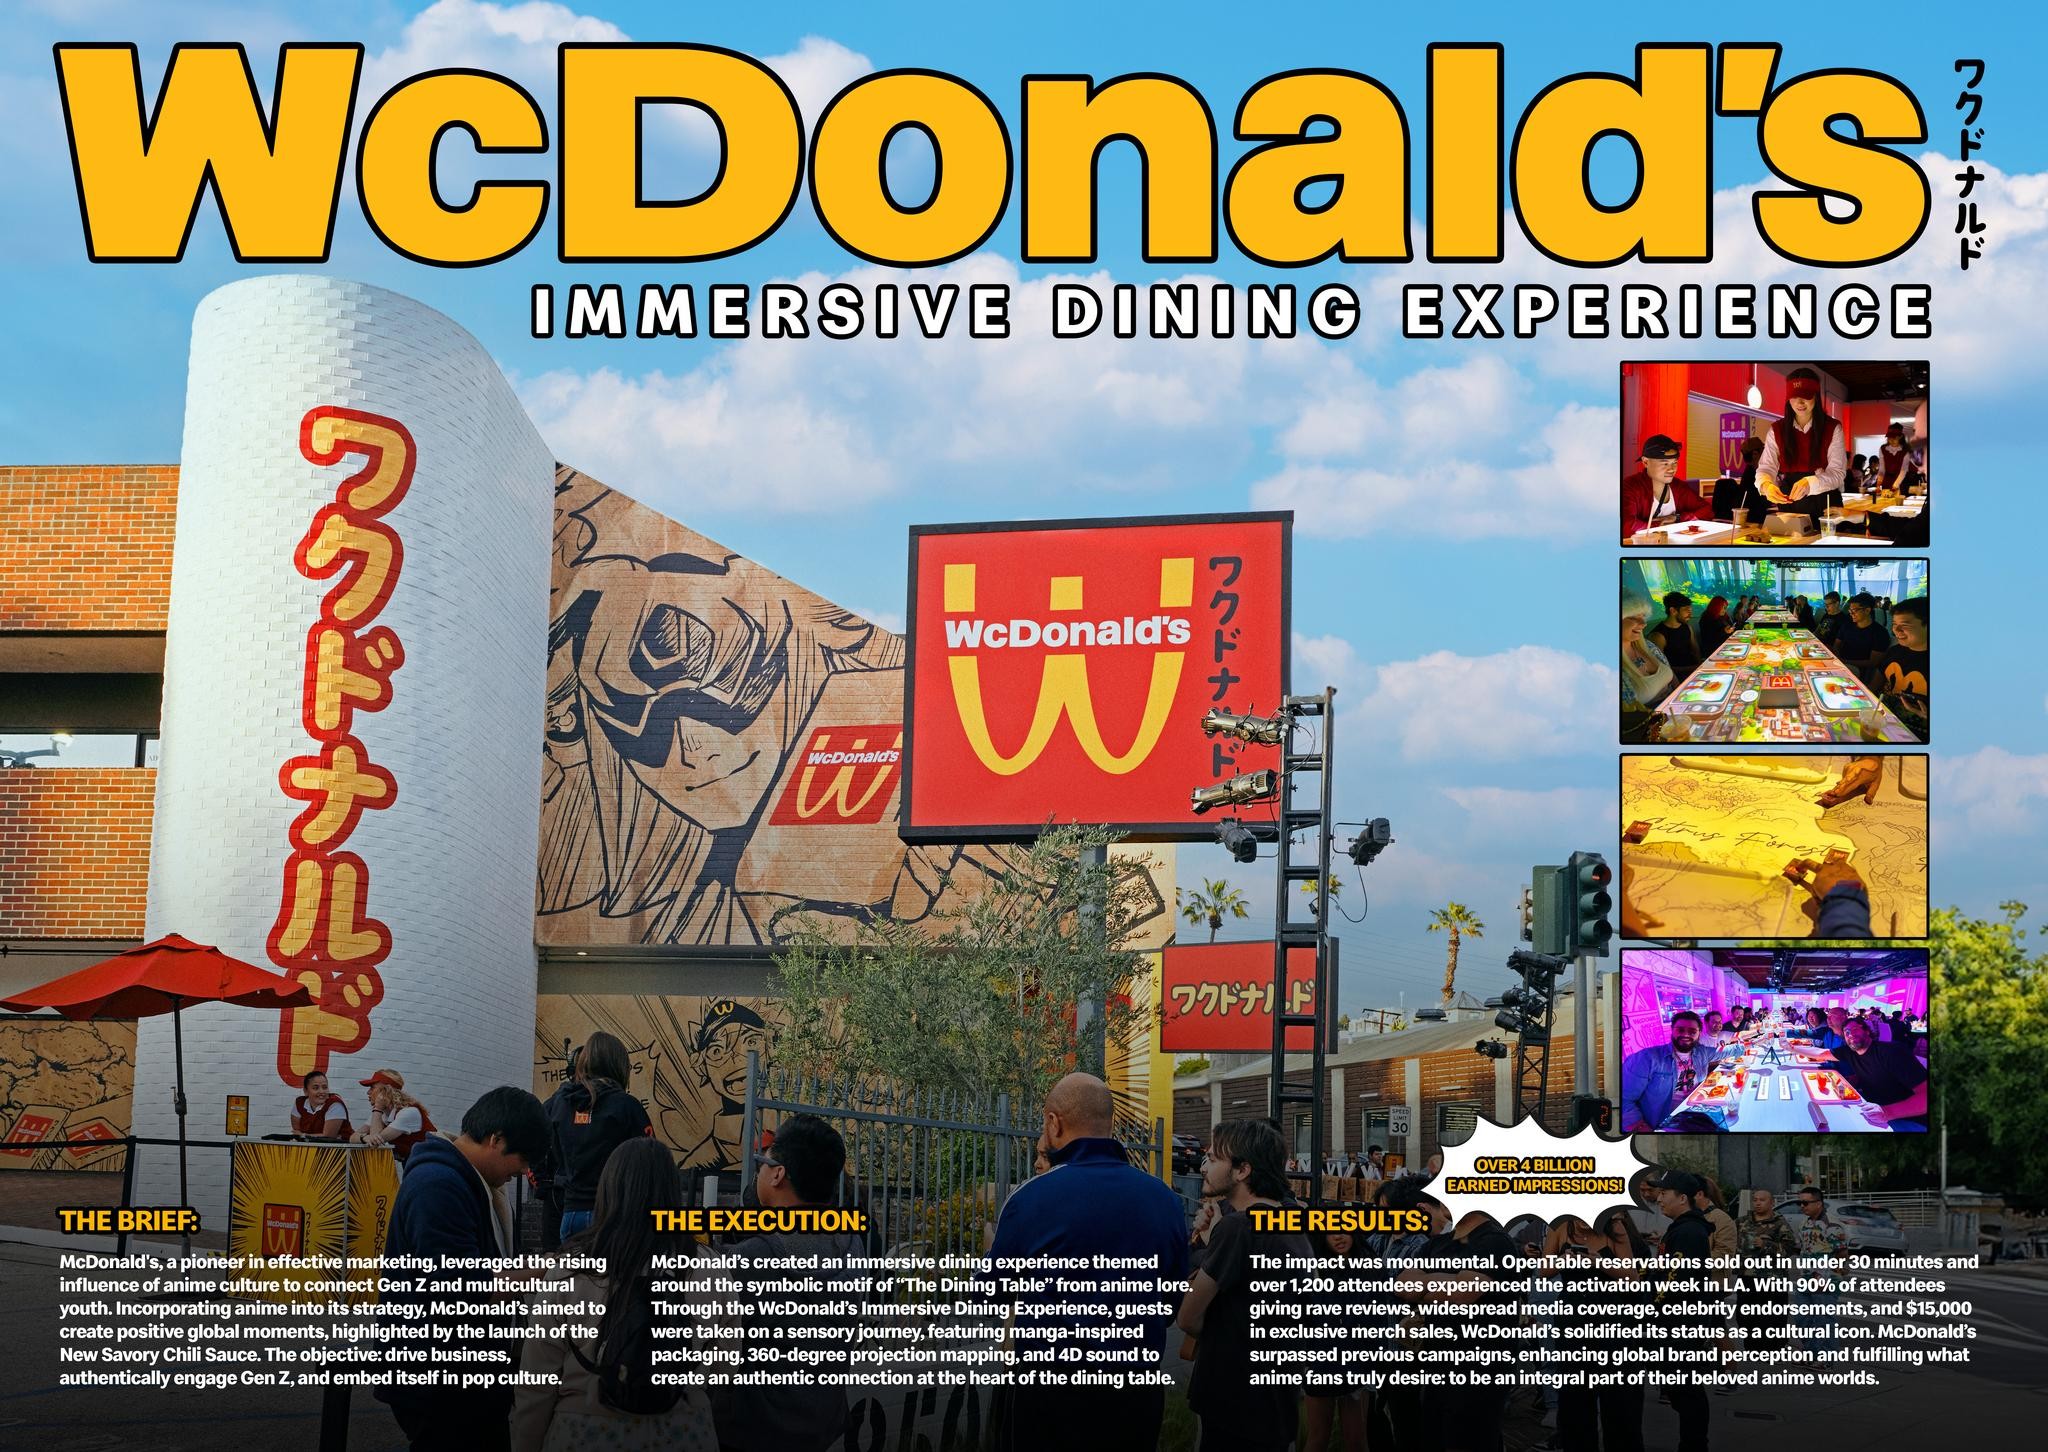 WcDonald’s Immersive Dining Experience